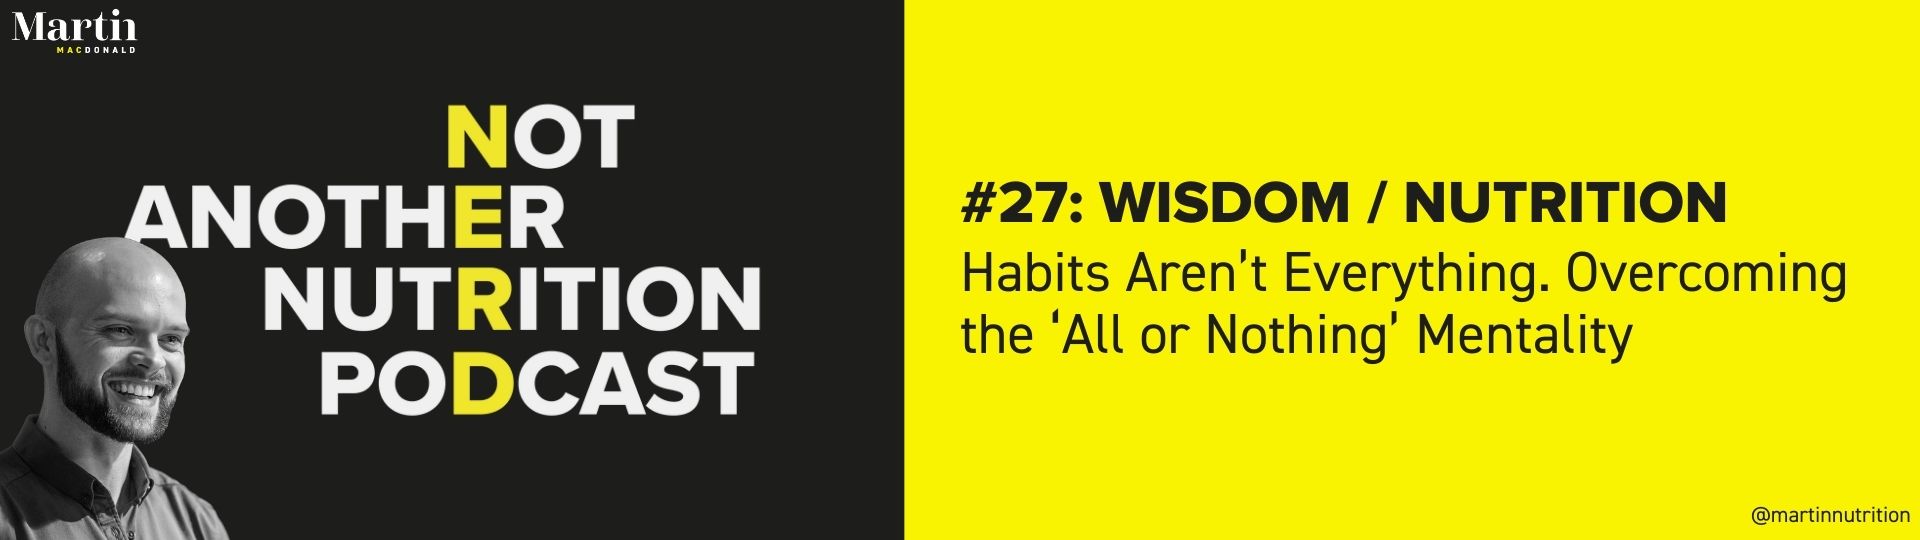 Habits aren't everything. Overcoming the 'all or nothing' mentality